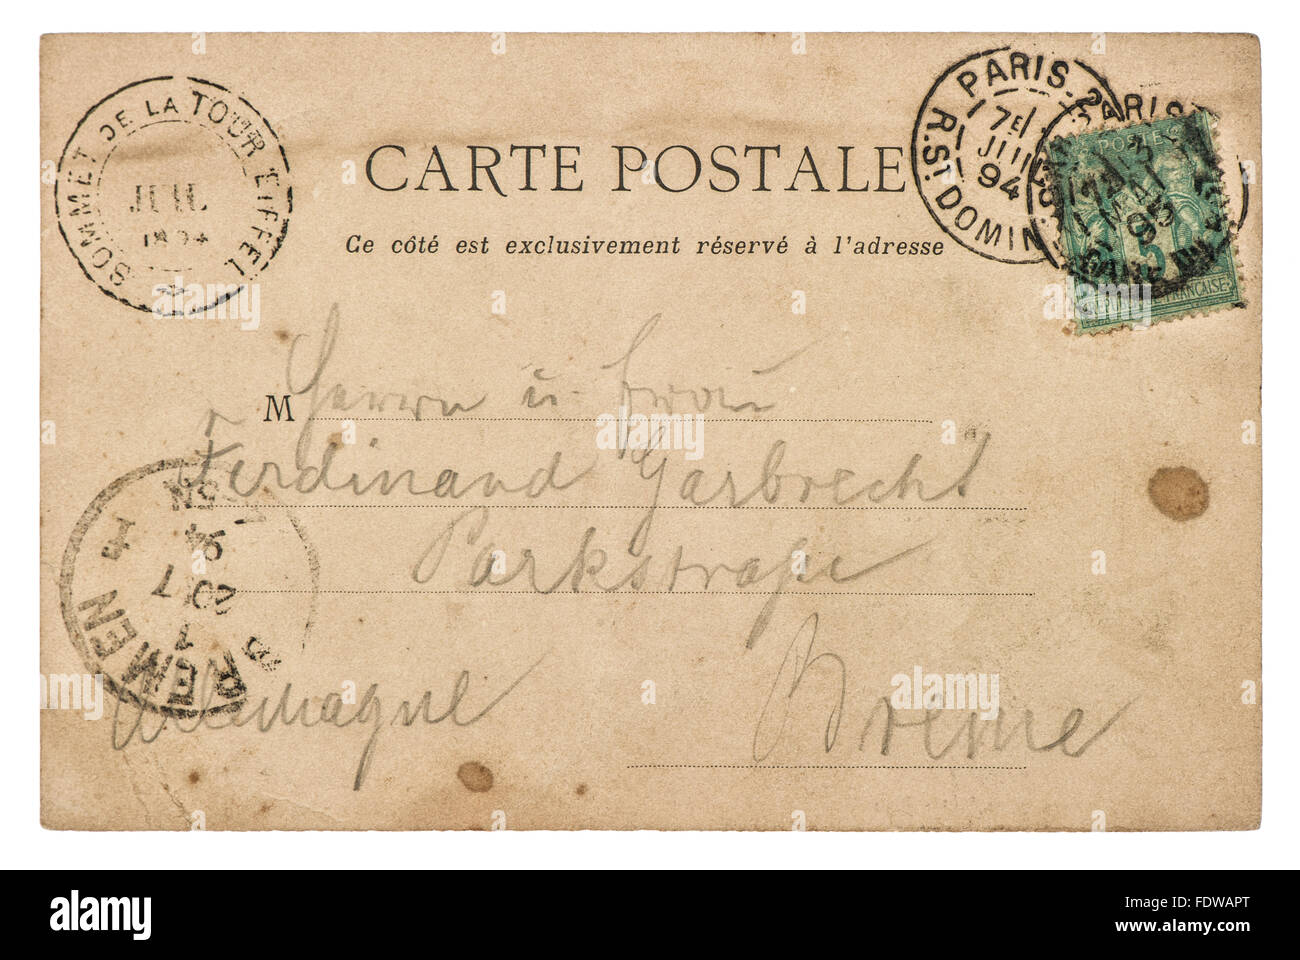 Vintage handwritten postcard letter with unreadable undefined text. Used paper texture Stock Photo